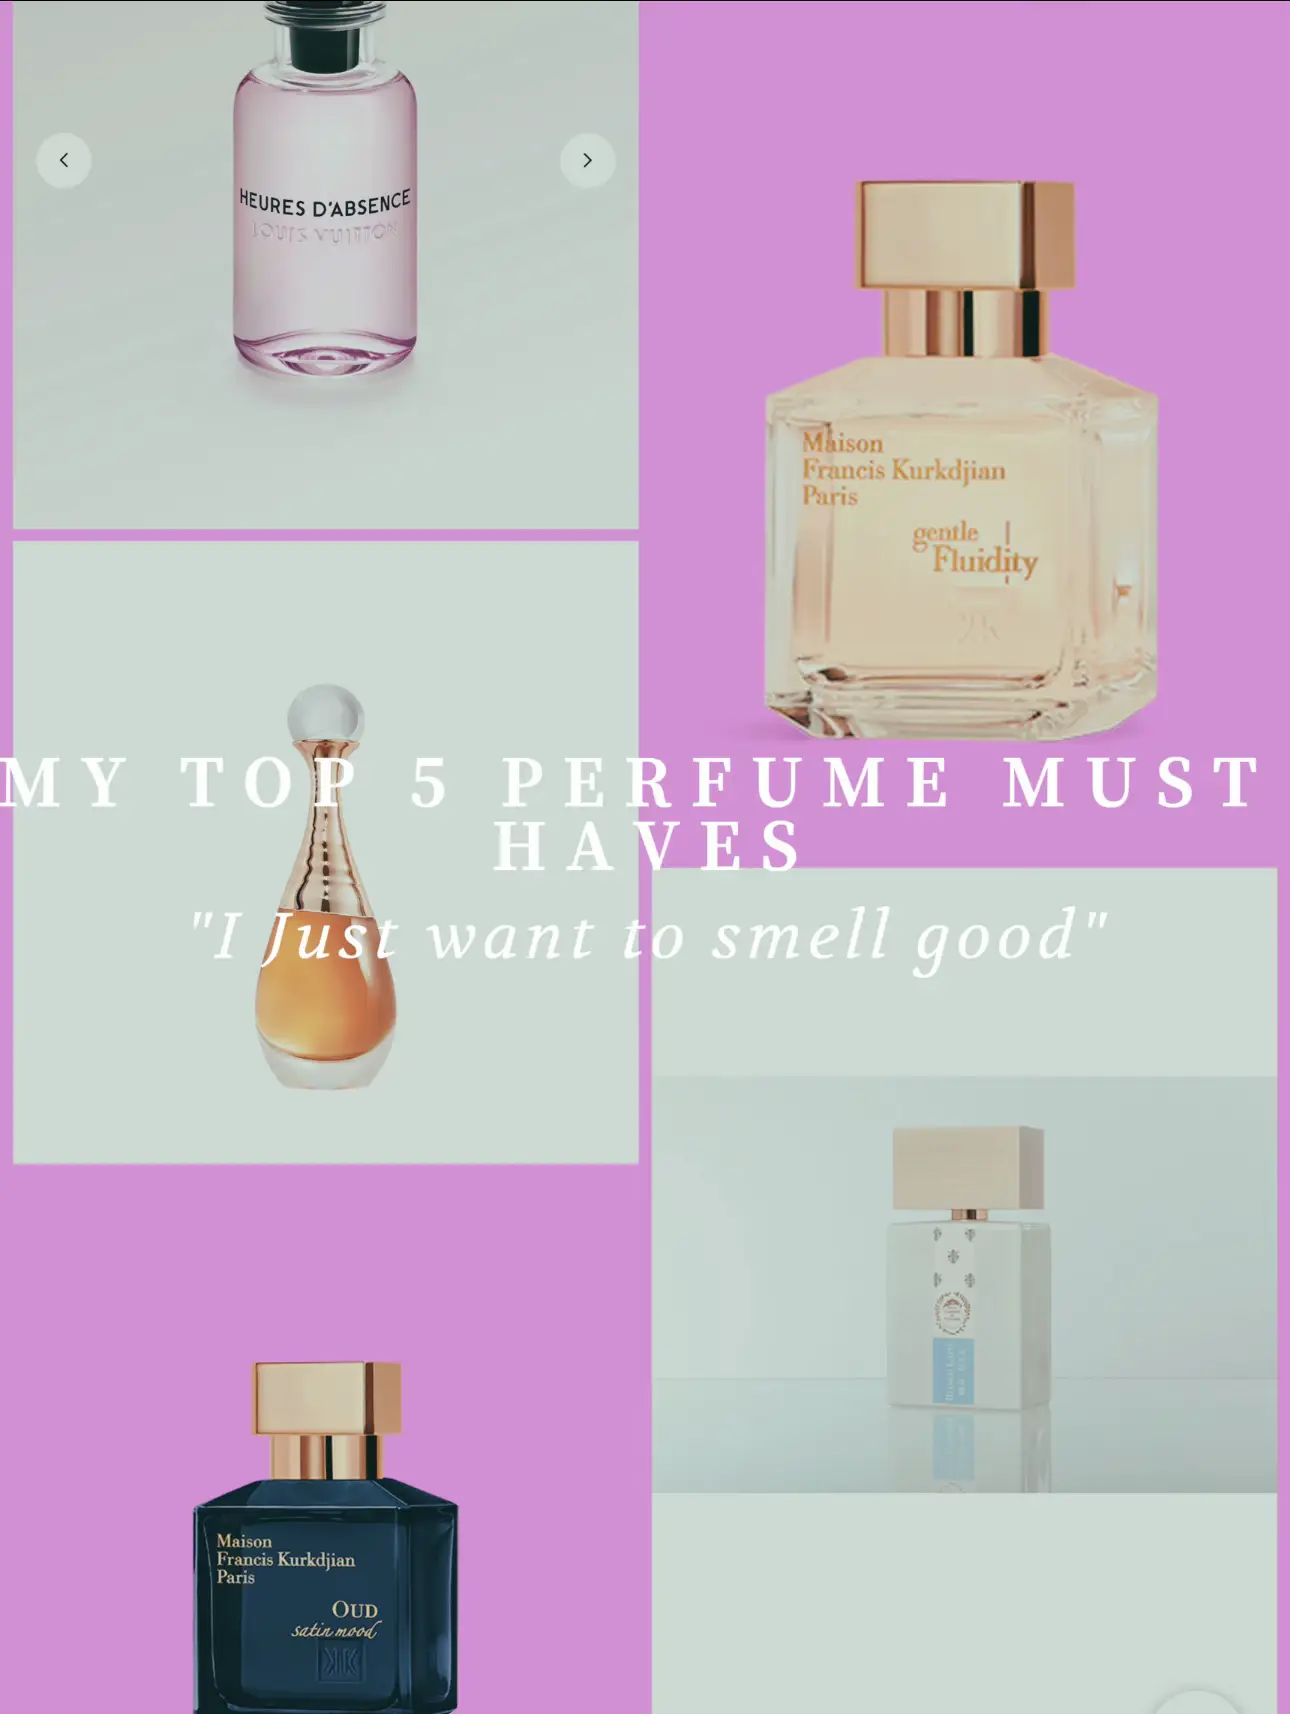 Louis Vuitton Heures d'Absence new floral musk perfume guide to scents